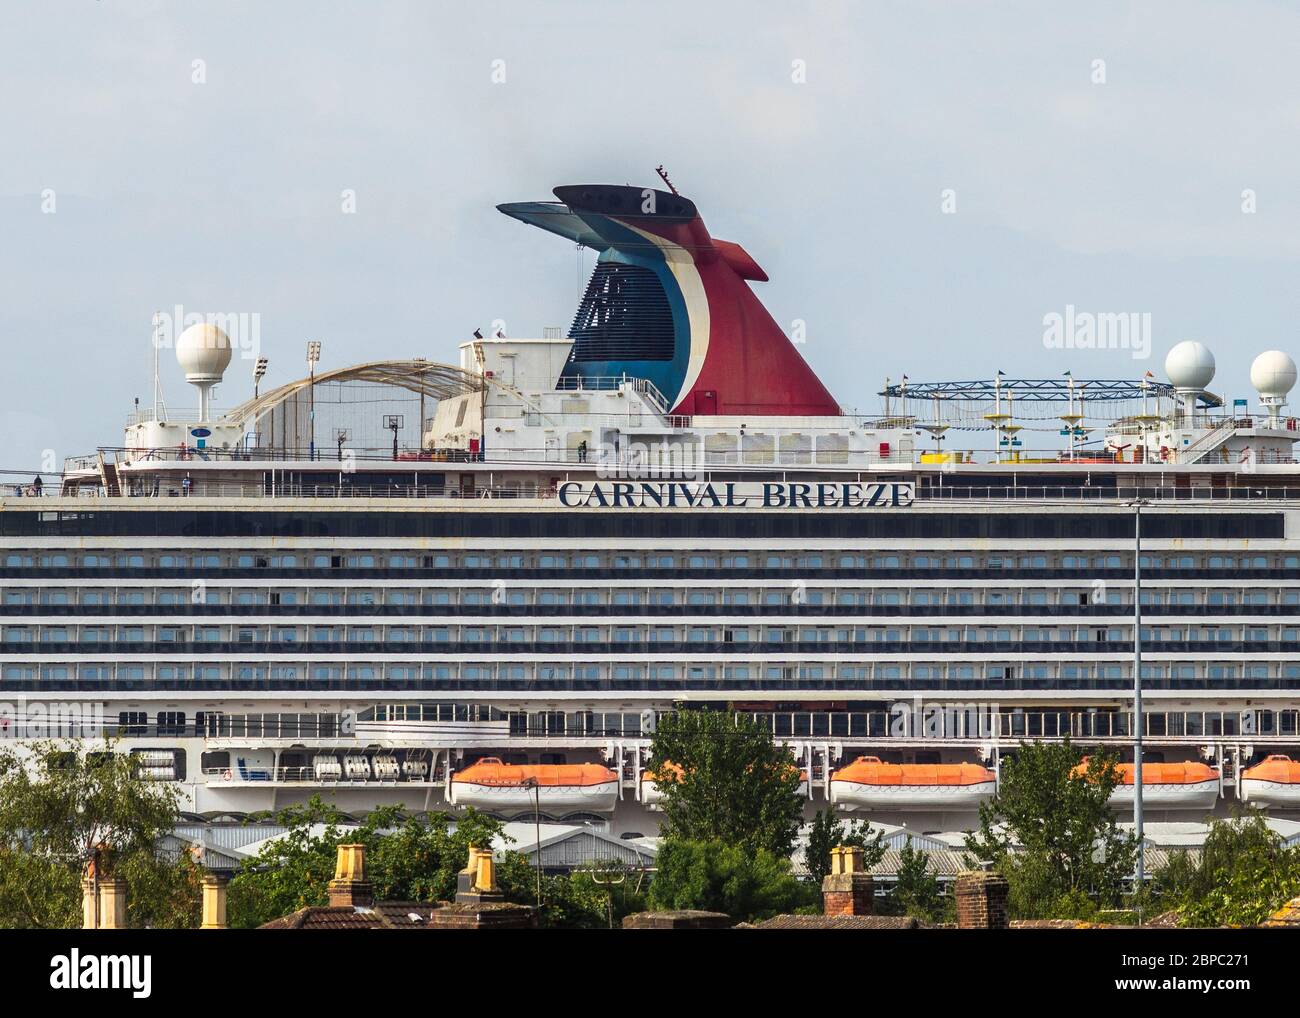 The funnel of the Carnival Breeze cruise ship operated by Carnival Cruise Line docked in Southampton May 2020, England, UK Stock Photo